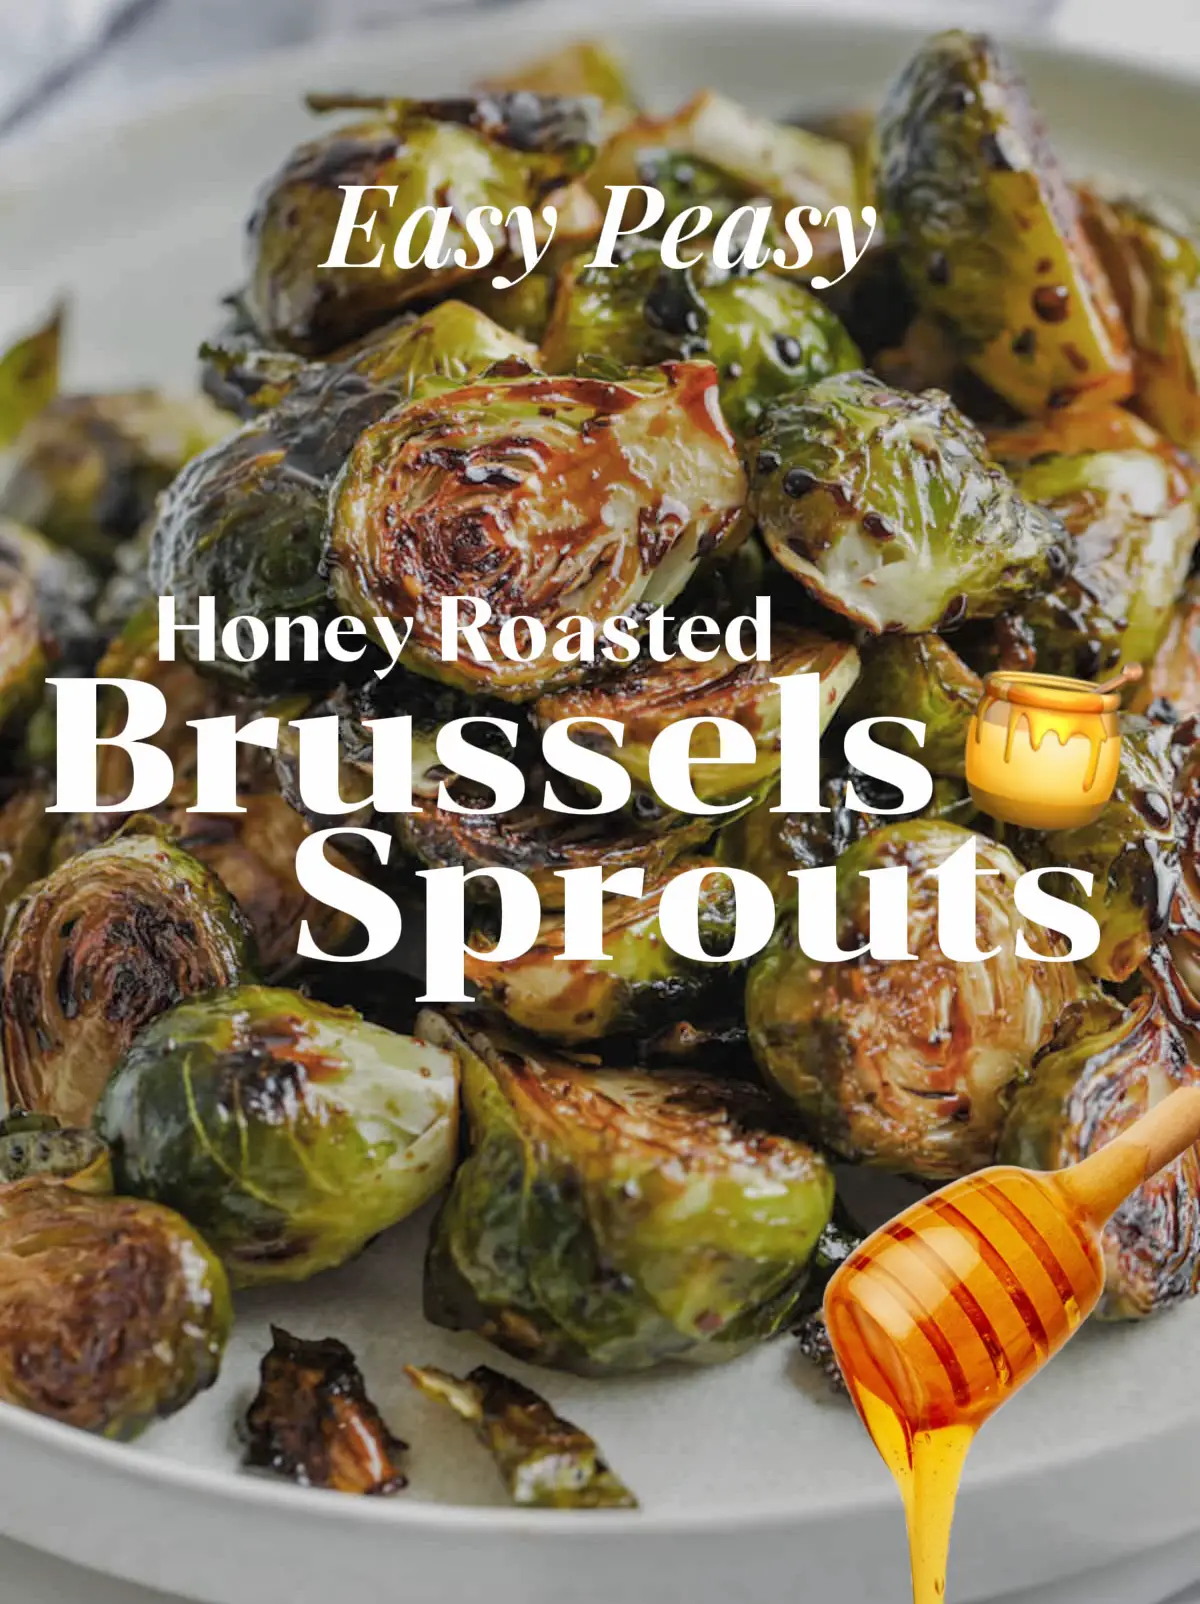 Honey roasted brussels sprouts🥺🍯's images